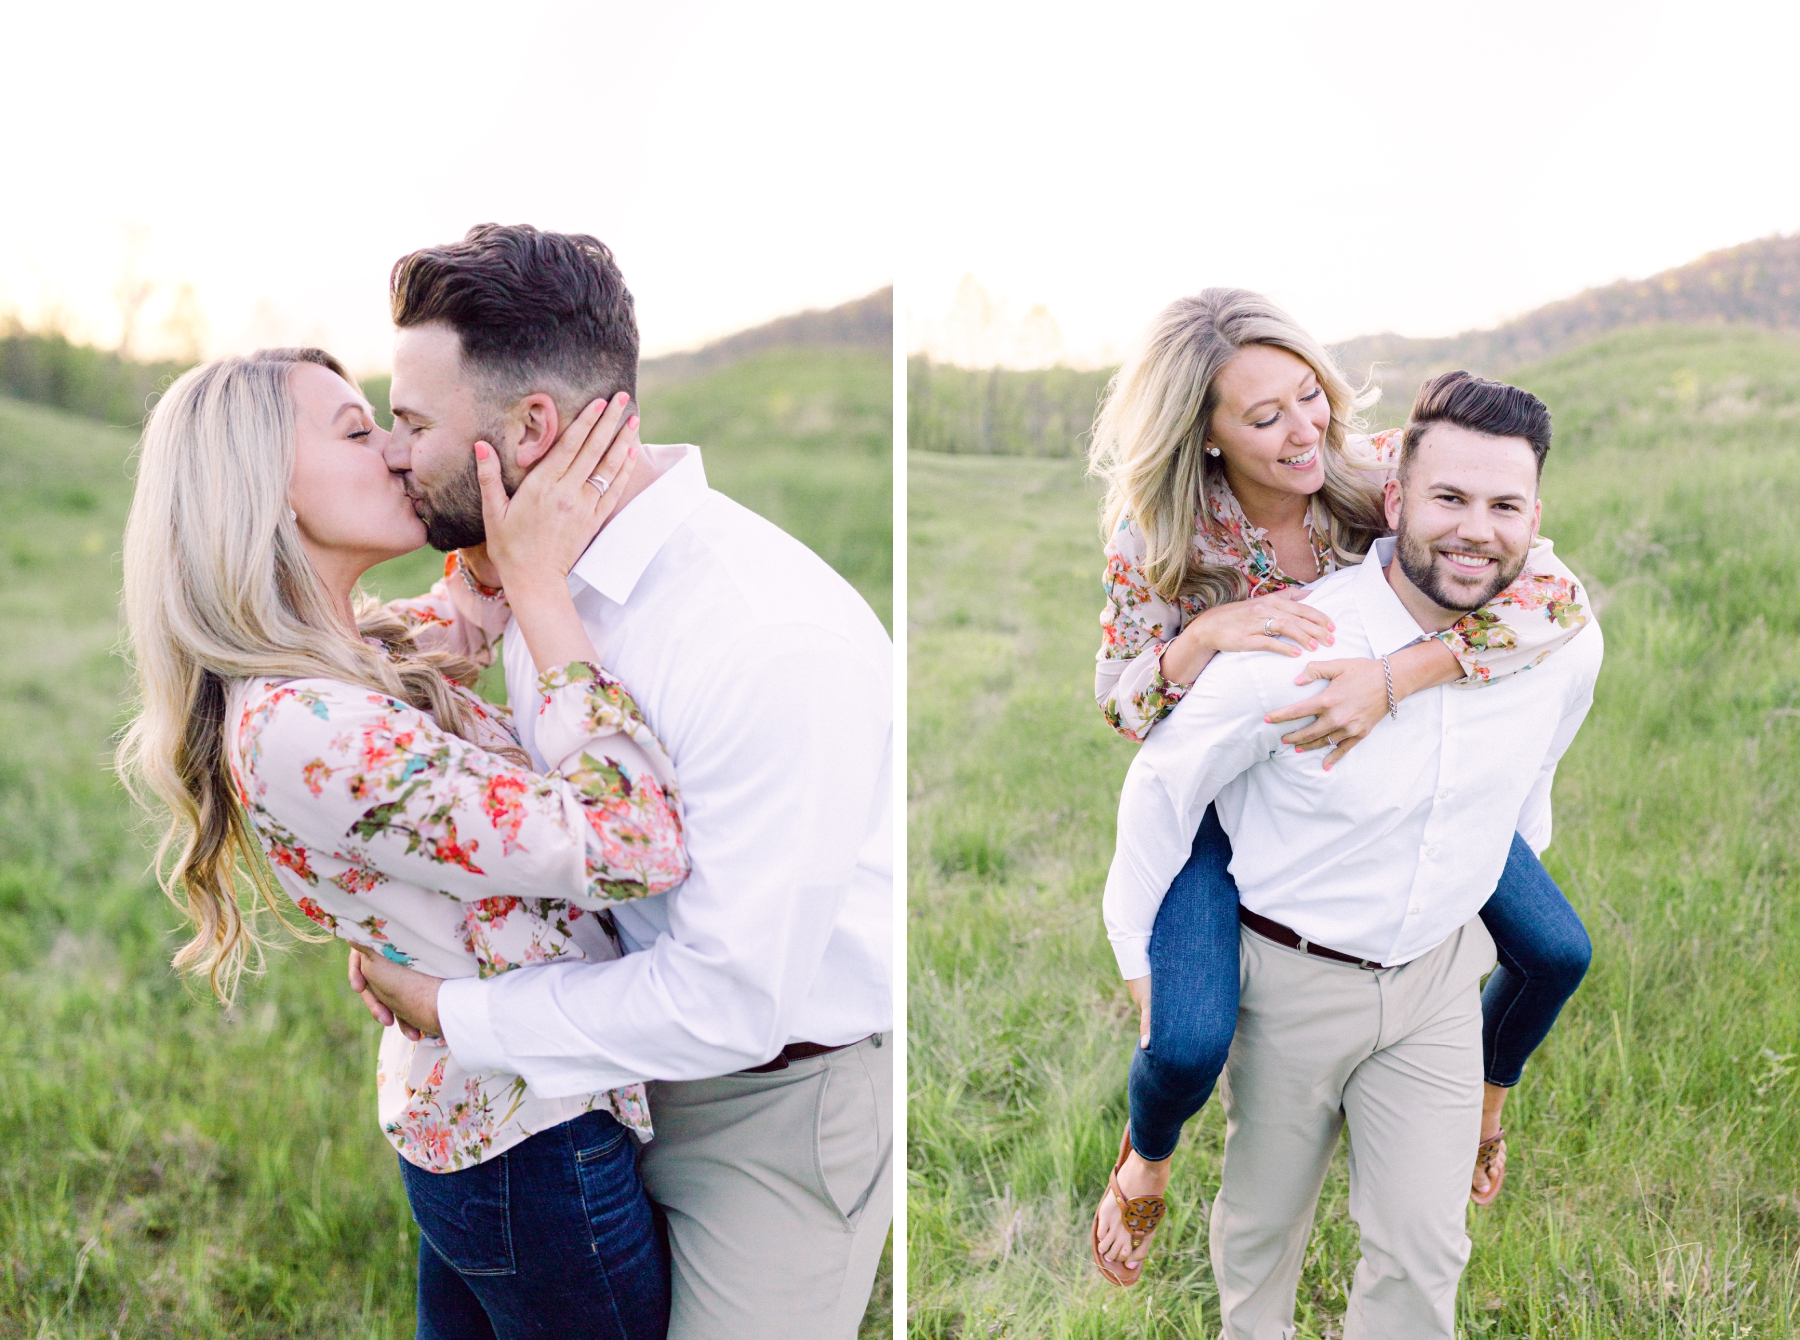 5 tips to prepare for your engagement session